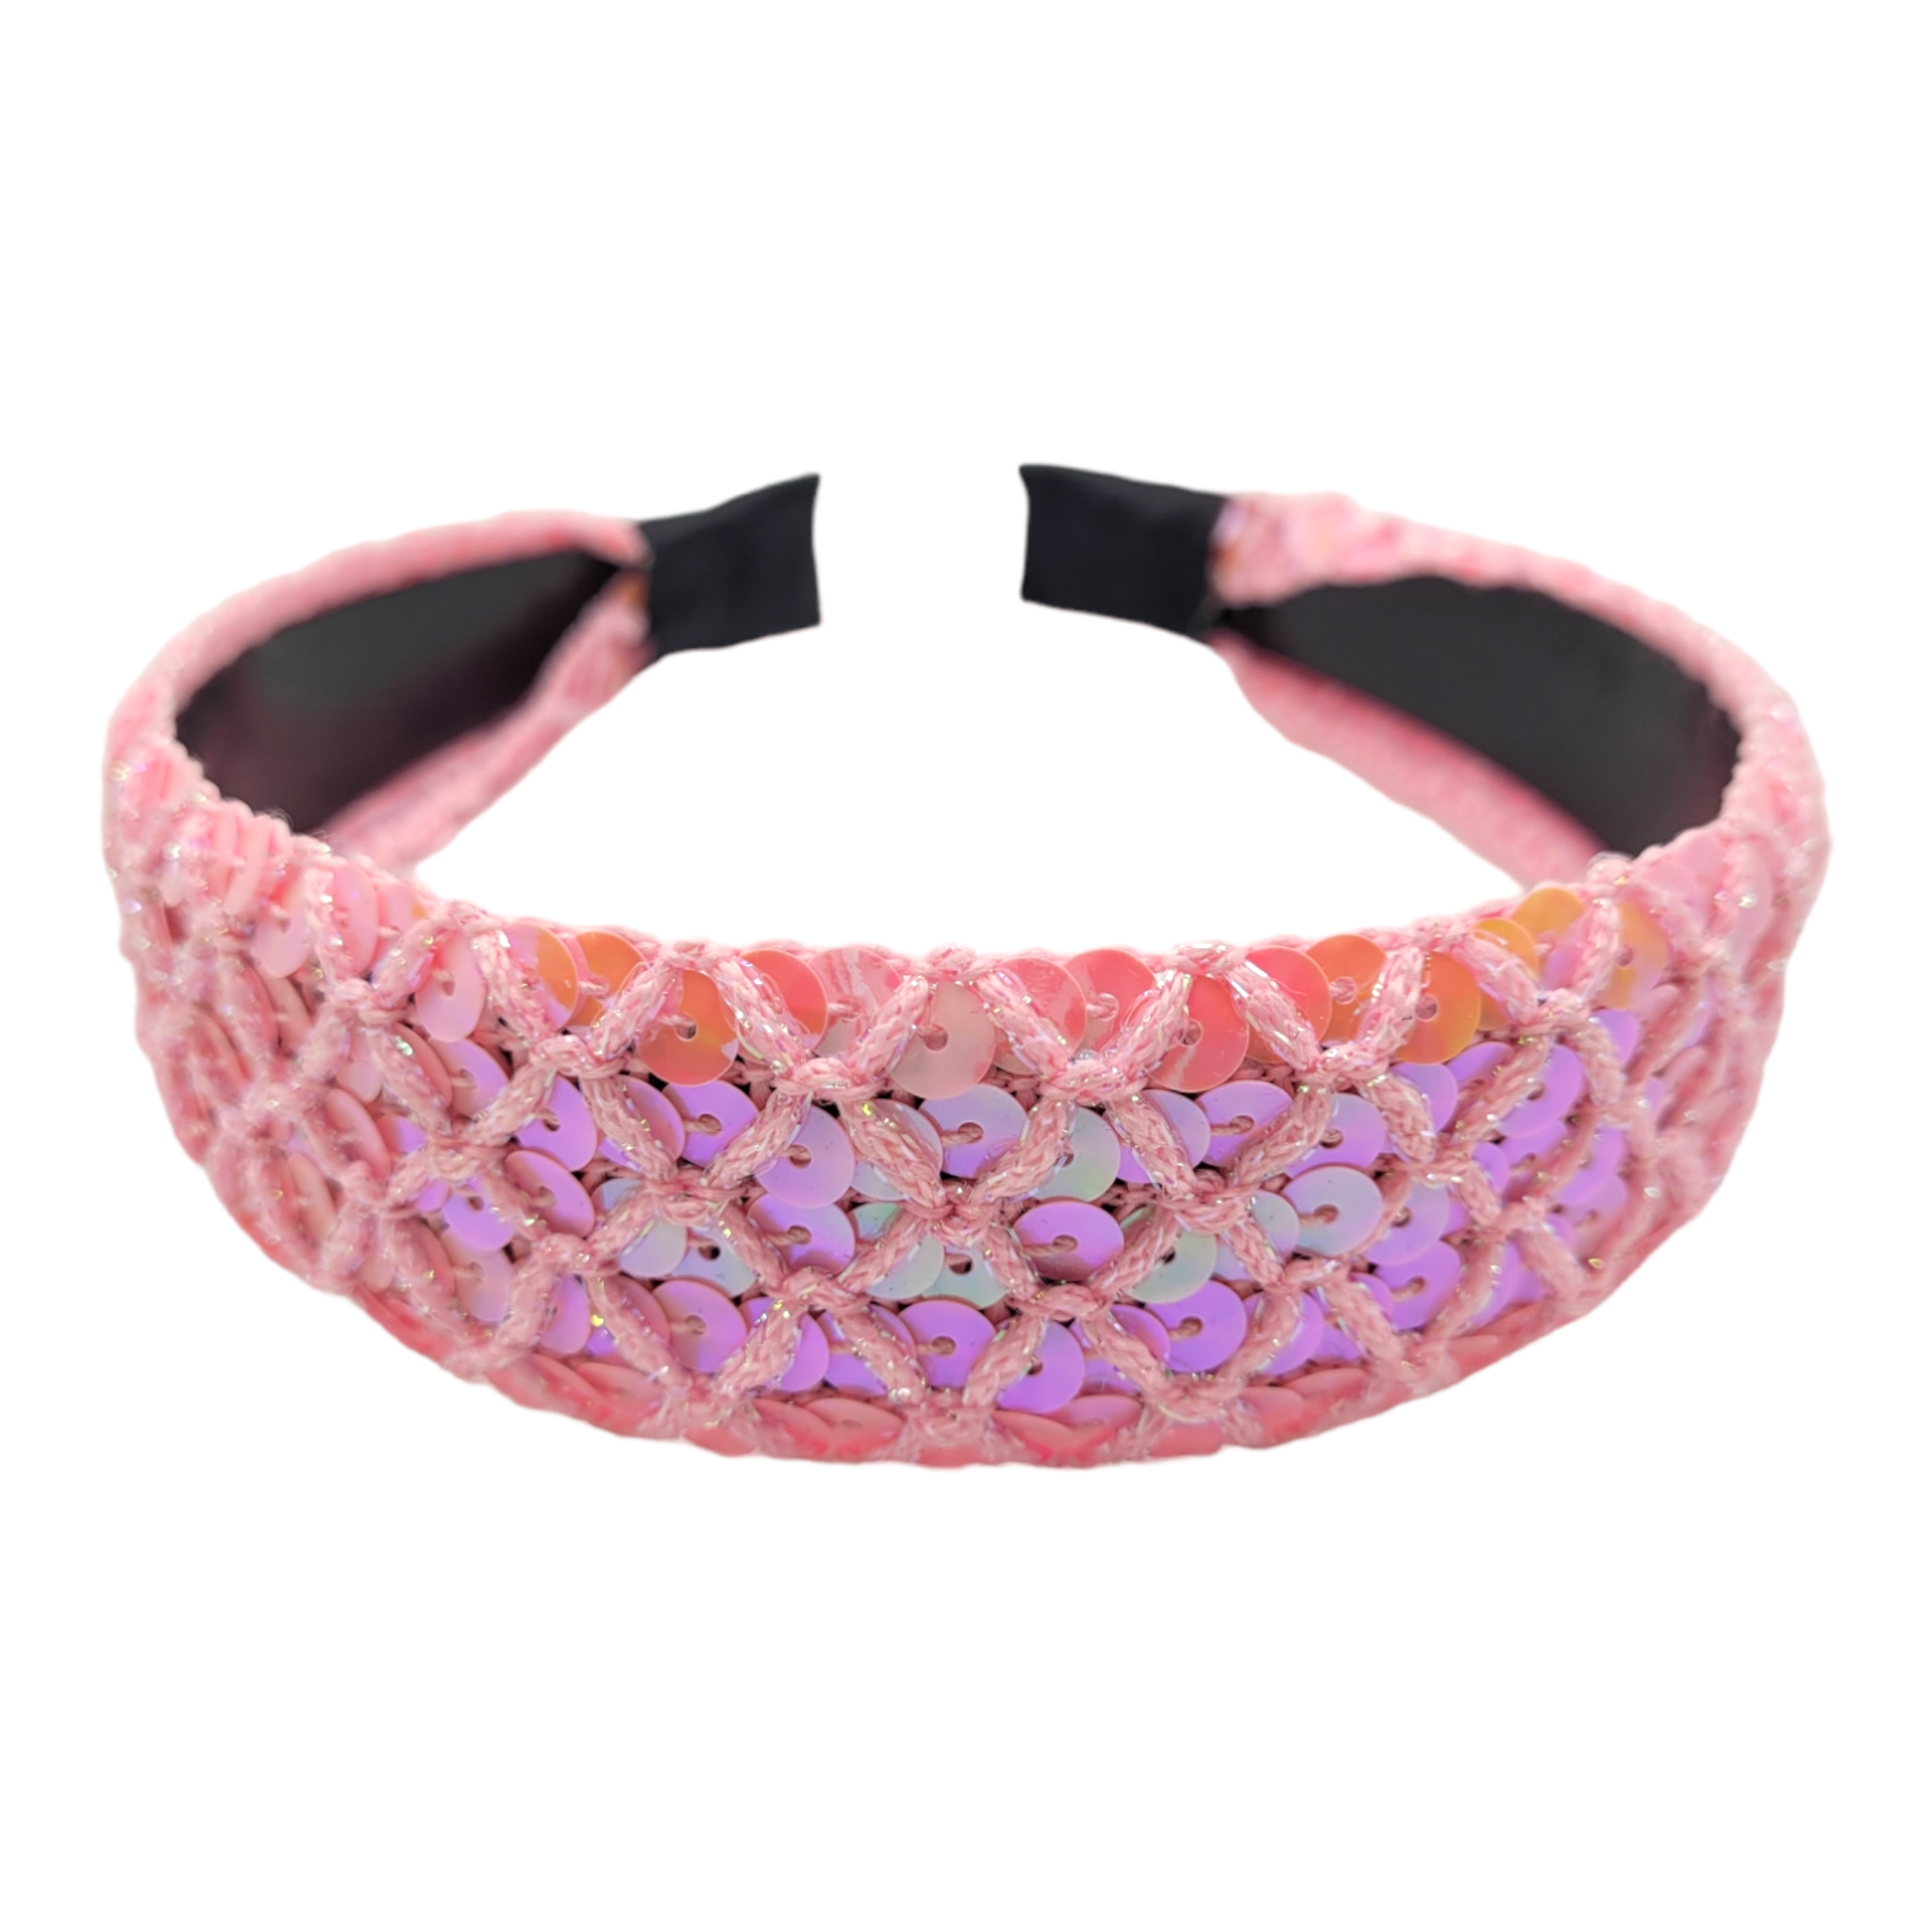 Pink Sequin Headband-Accessories-LouisGeorge Boutique-LouisGeorge Boutique, Women’s Fashion Boutique Located in Trussville, Alabama